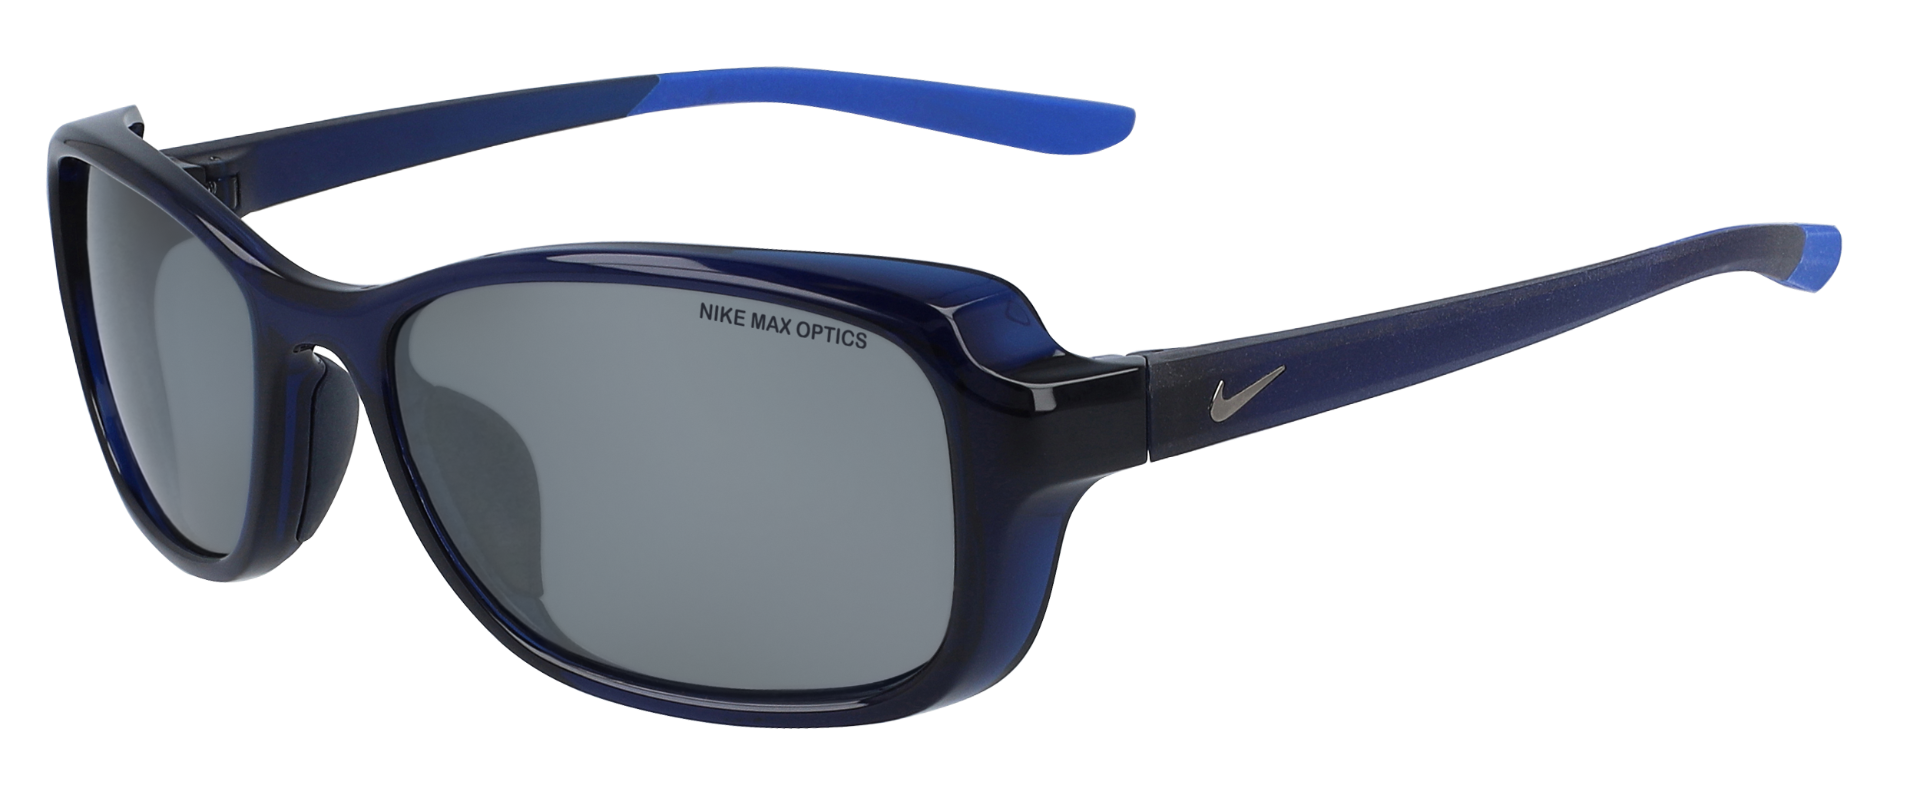 Nike Breeze women's sunglasses in navy with silver flash lenses.